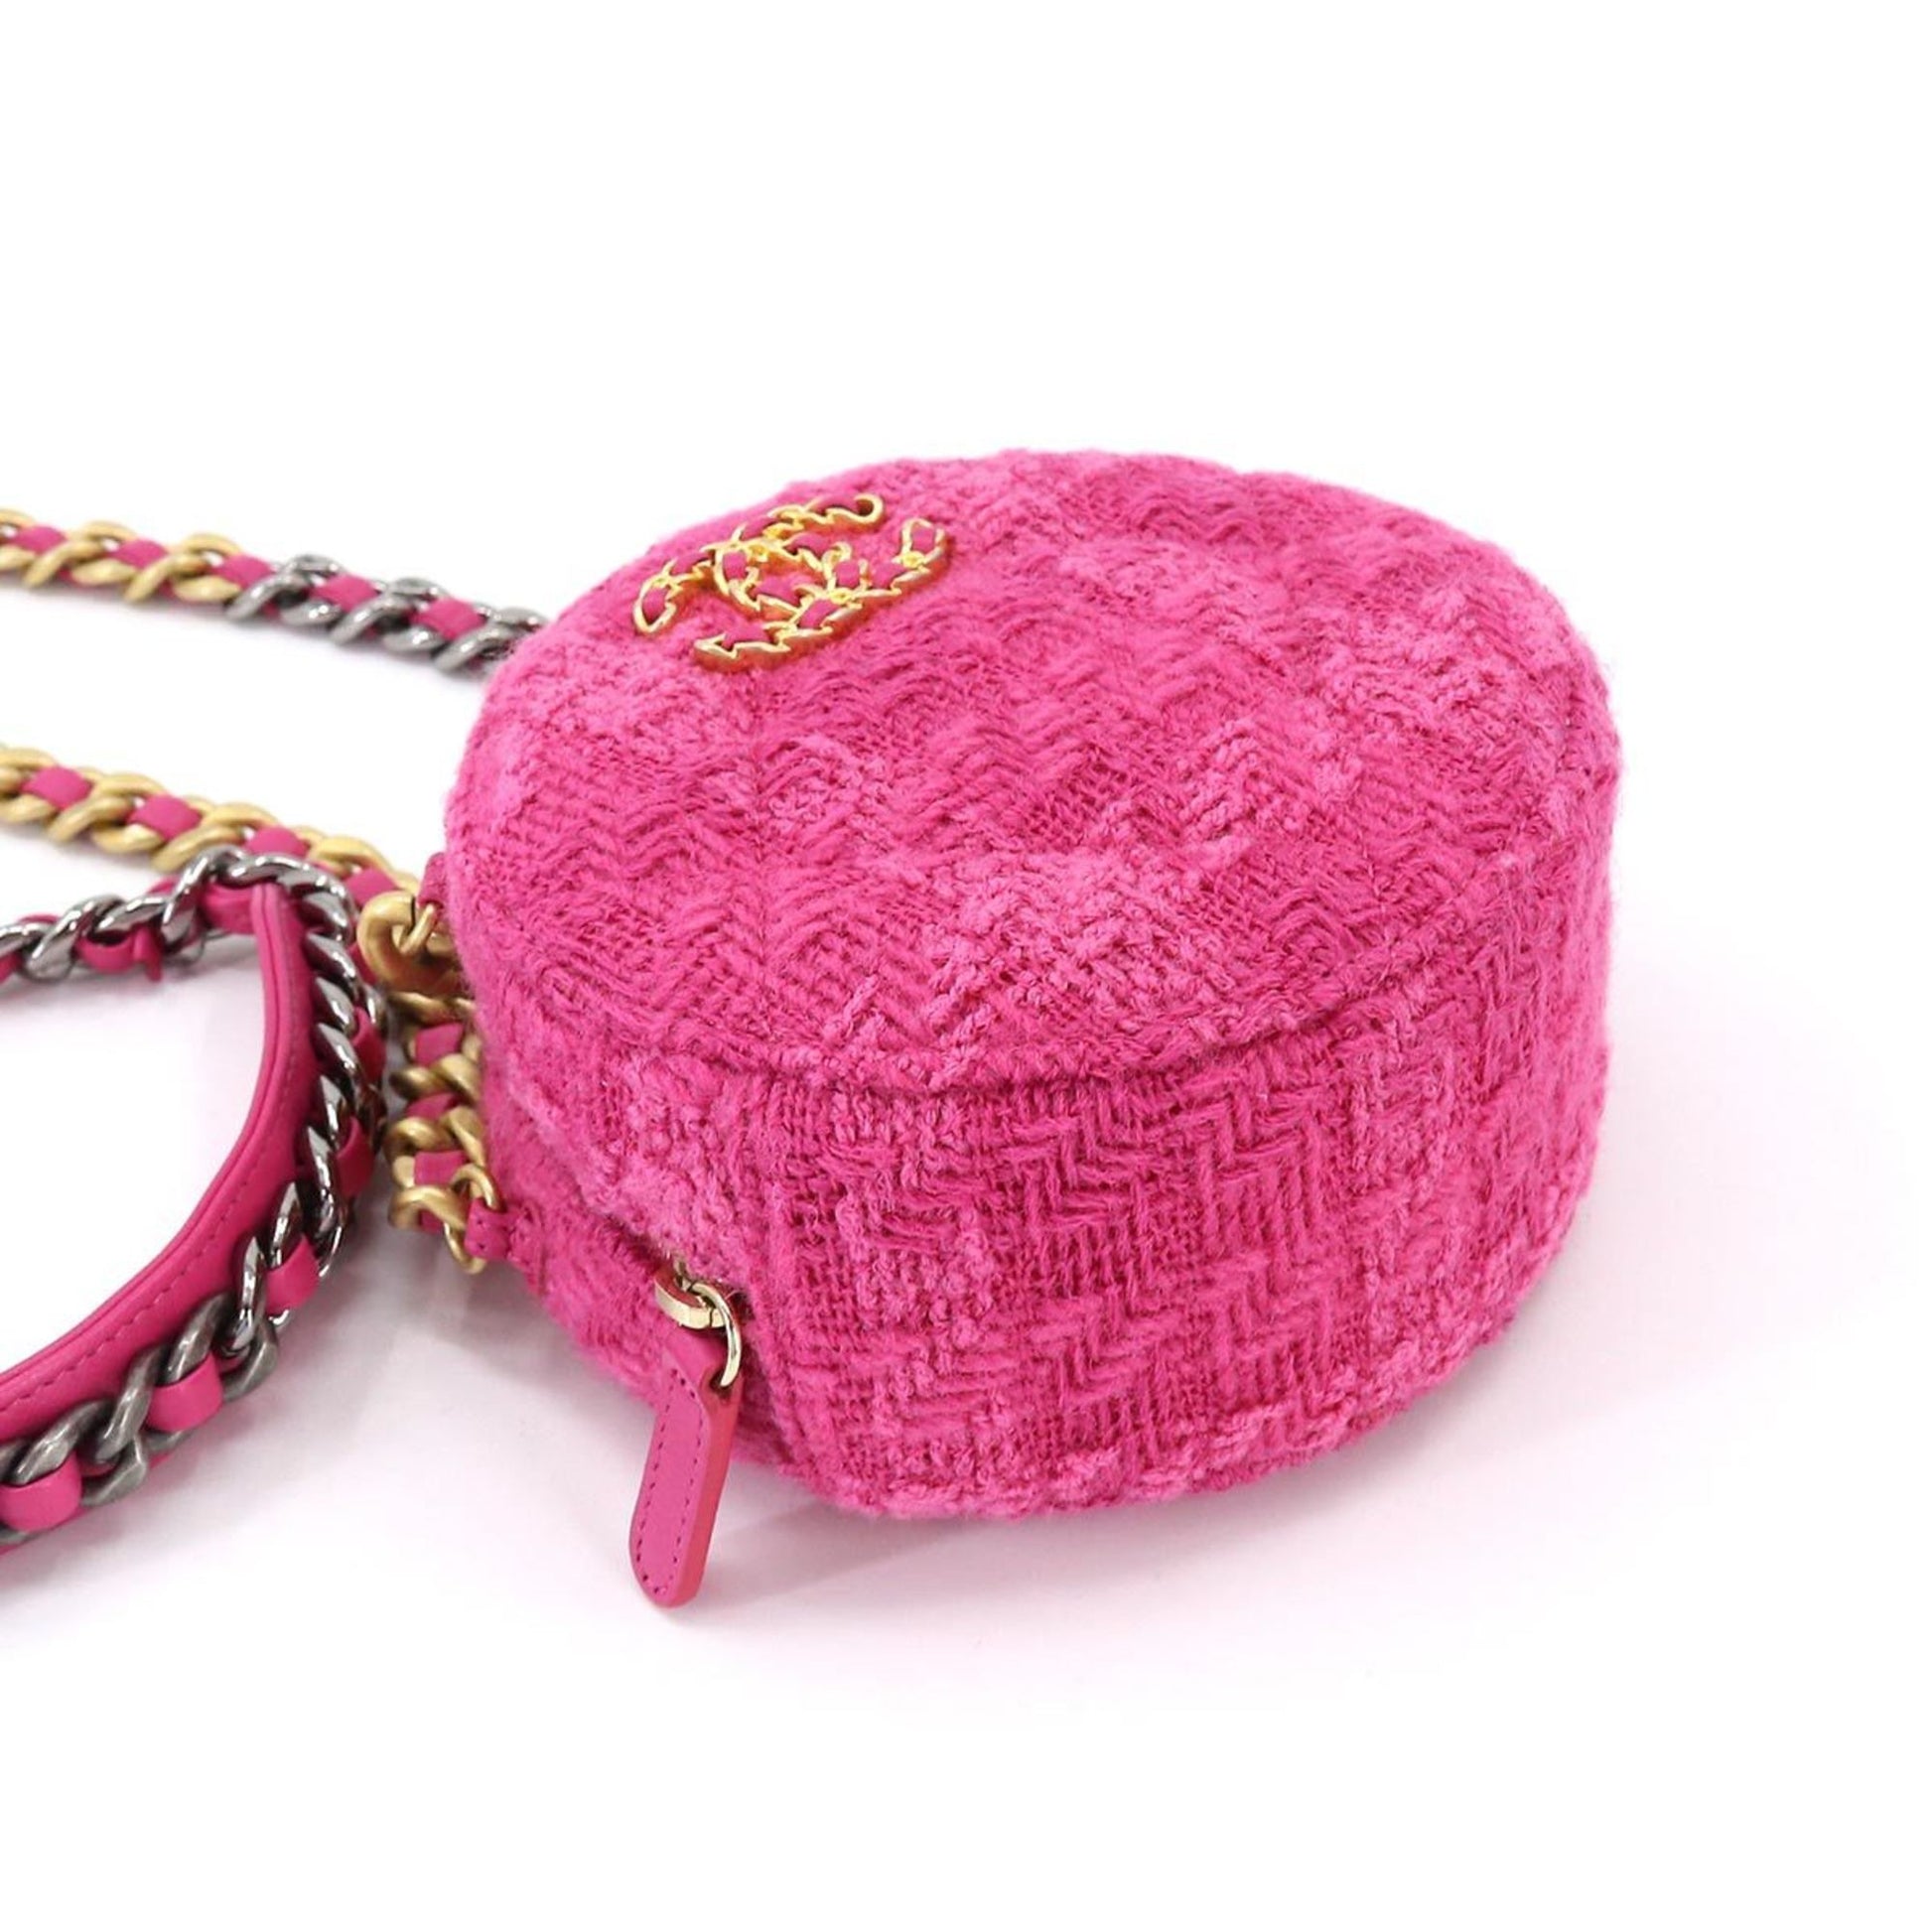 CHANEL 19 Bag with round chain shoulder bag tweed leather pink pouch